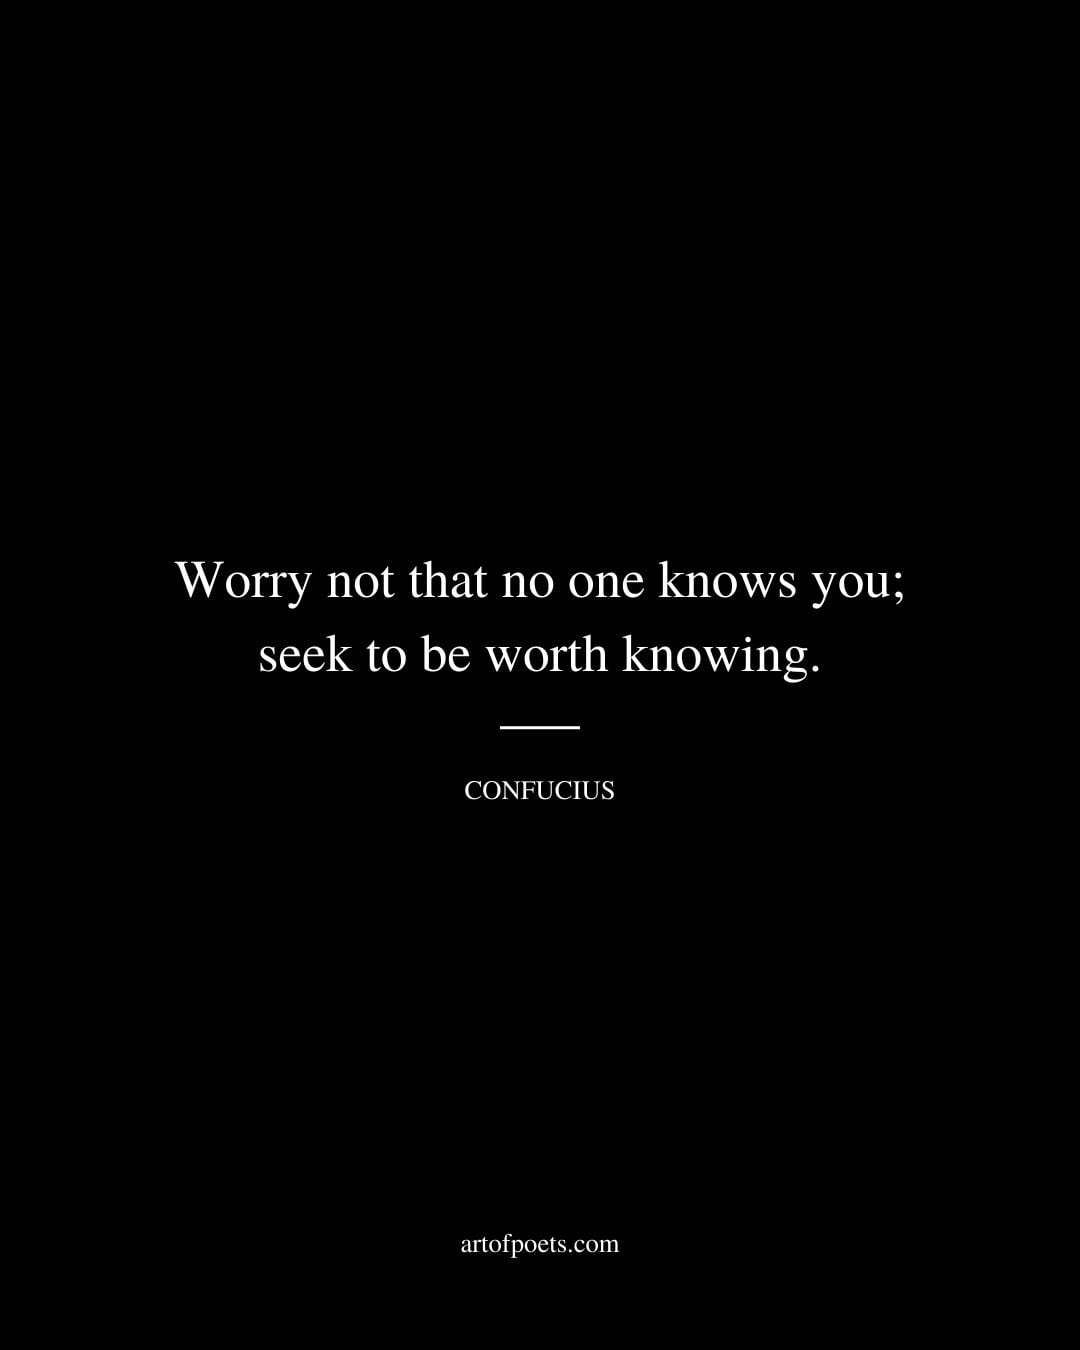 Worry not that no one knows you seek to be worth knowing